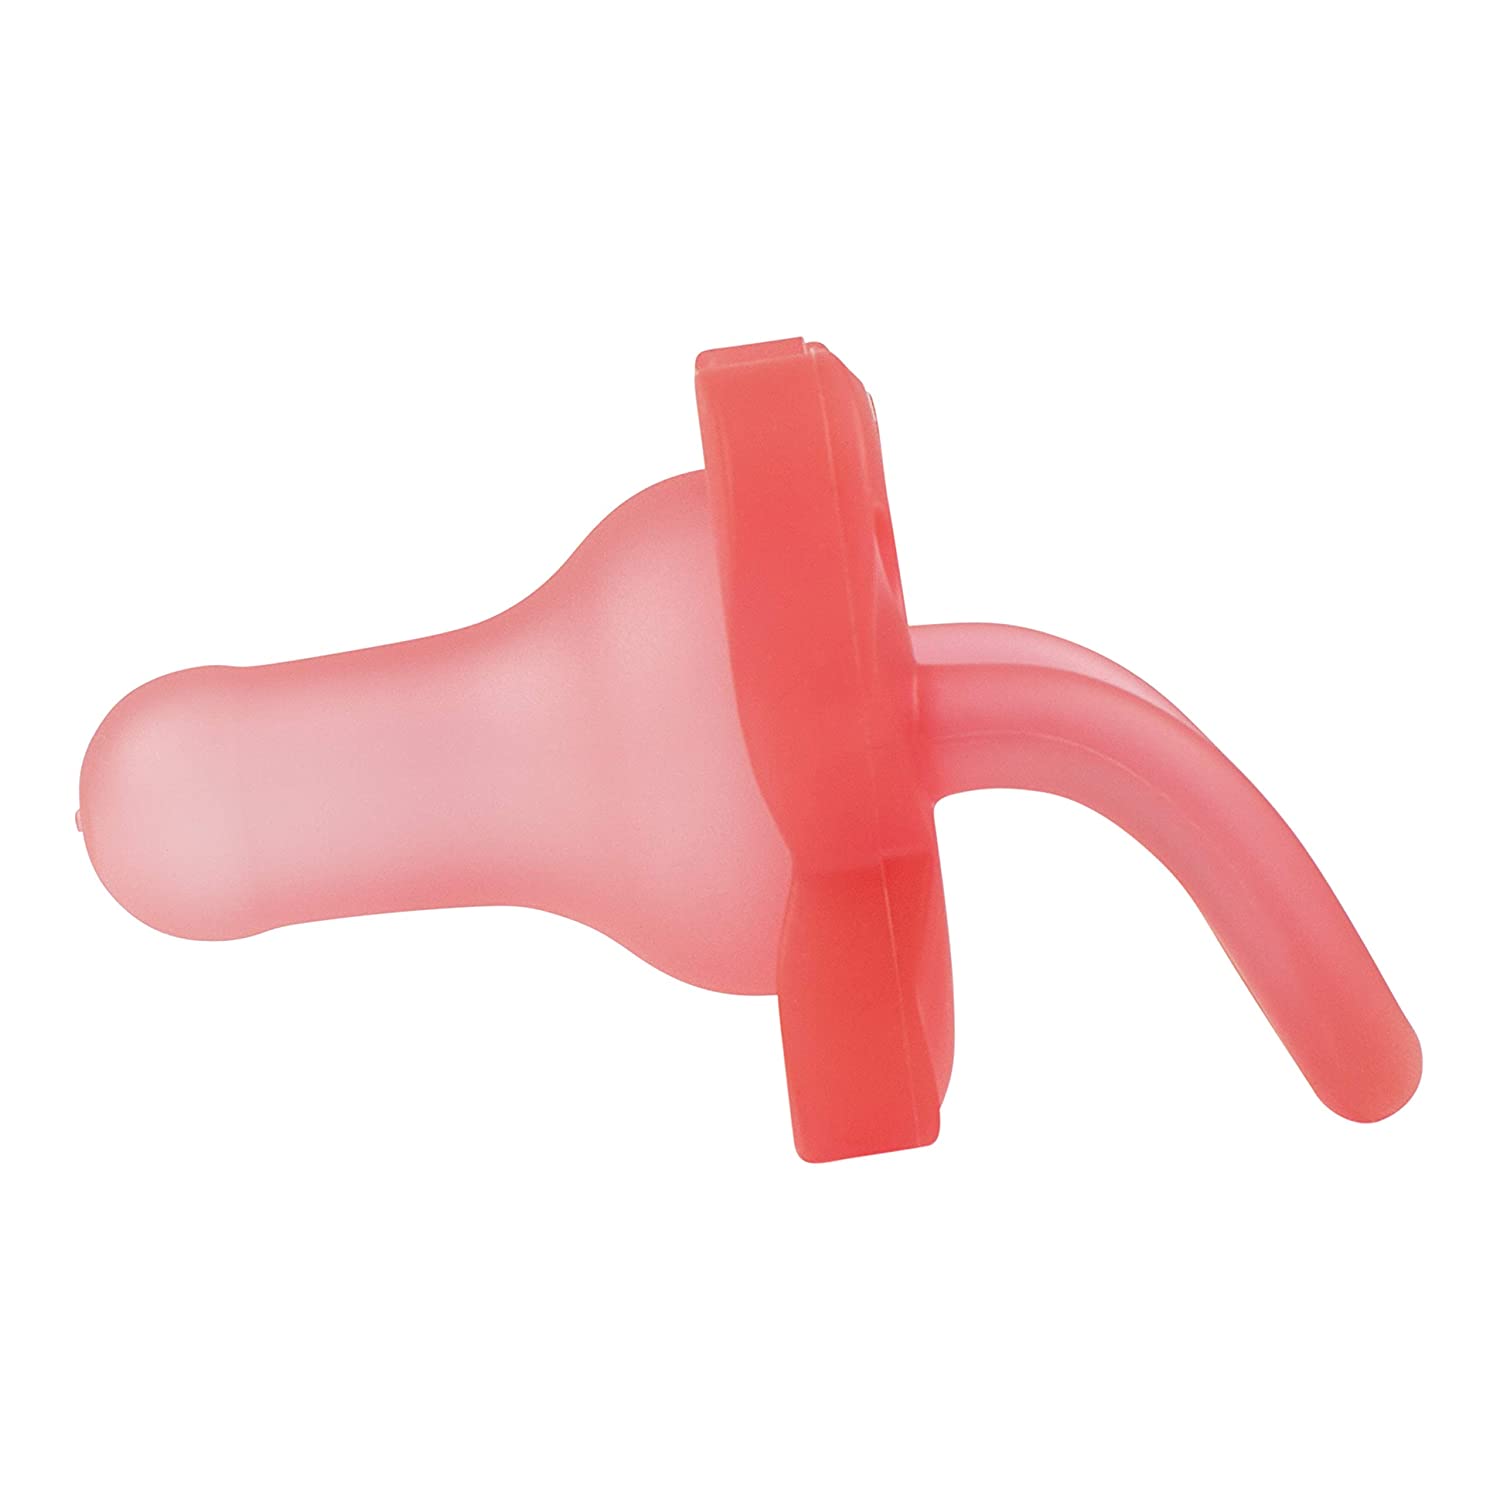 Dr. Browns Happy Pacifier Silicone Two-Piece Soother - Pink - DBPS12007-INTL